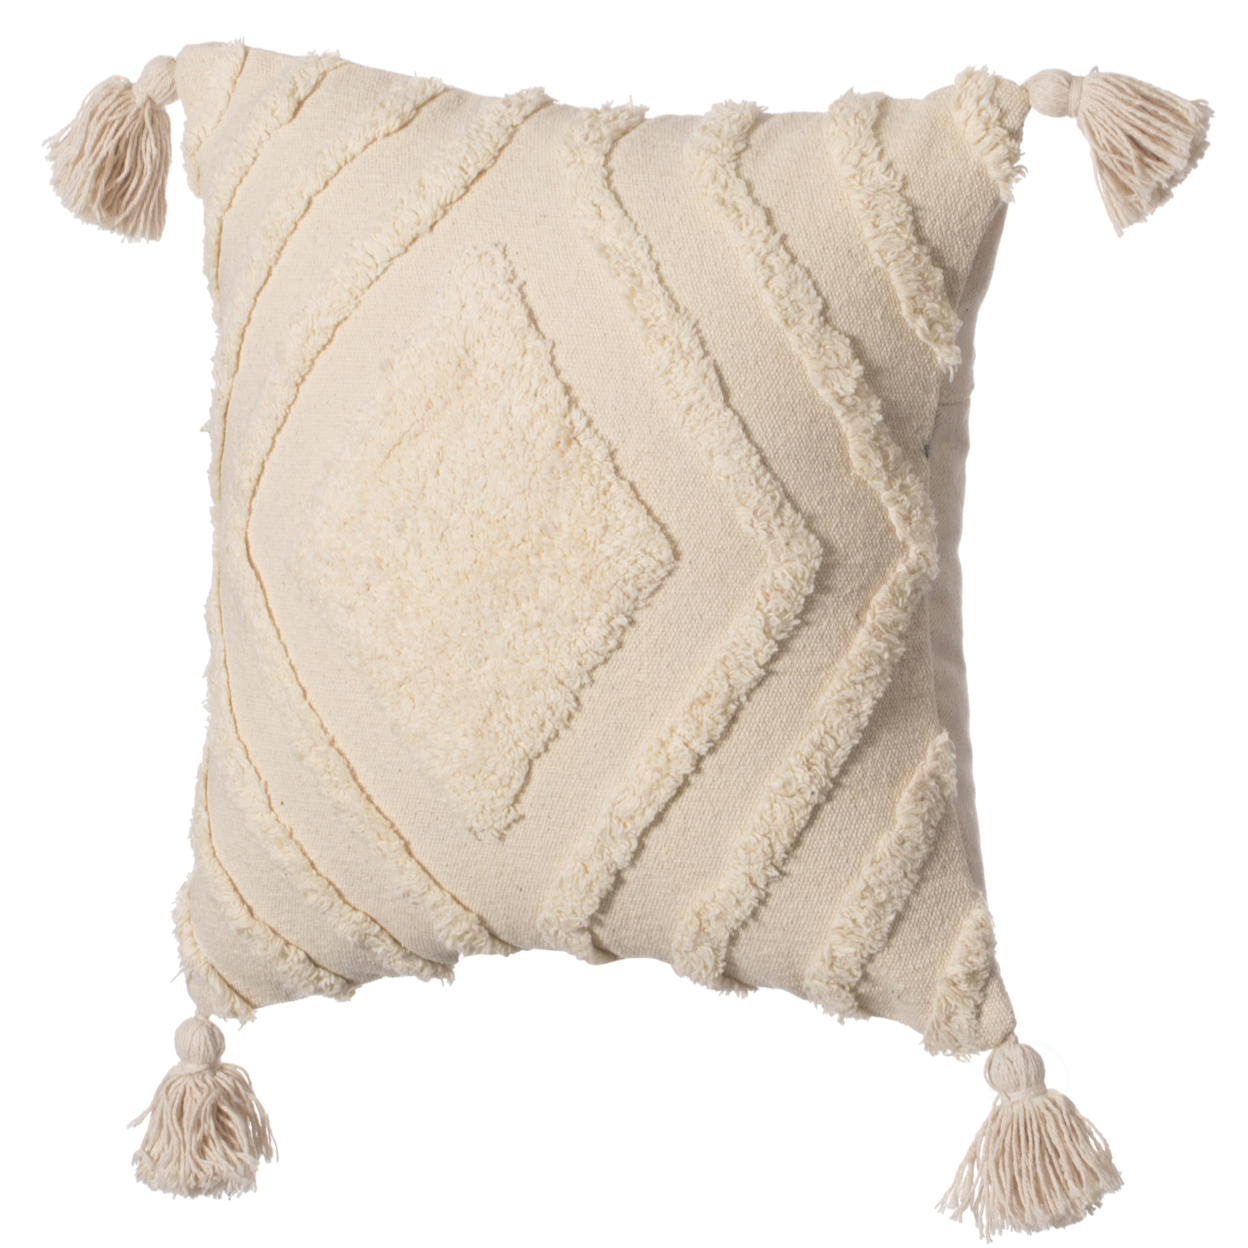 16 Handwoven Cotton Throw Pillow Cover With White On White Tufted Design And Tassel Corners - Ikat With Cushion